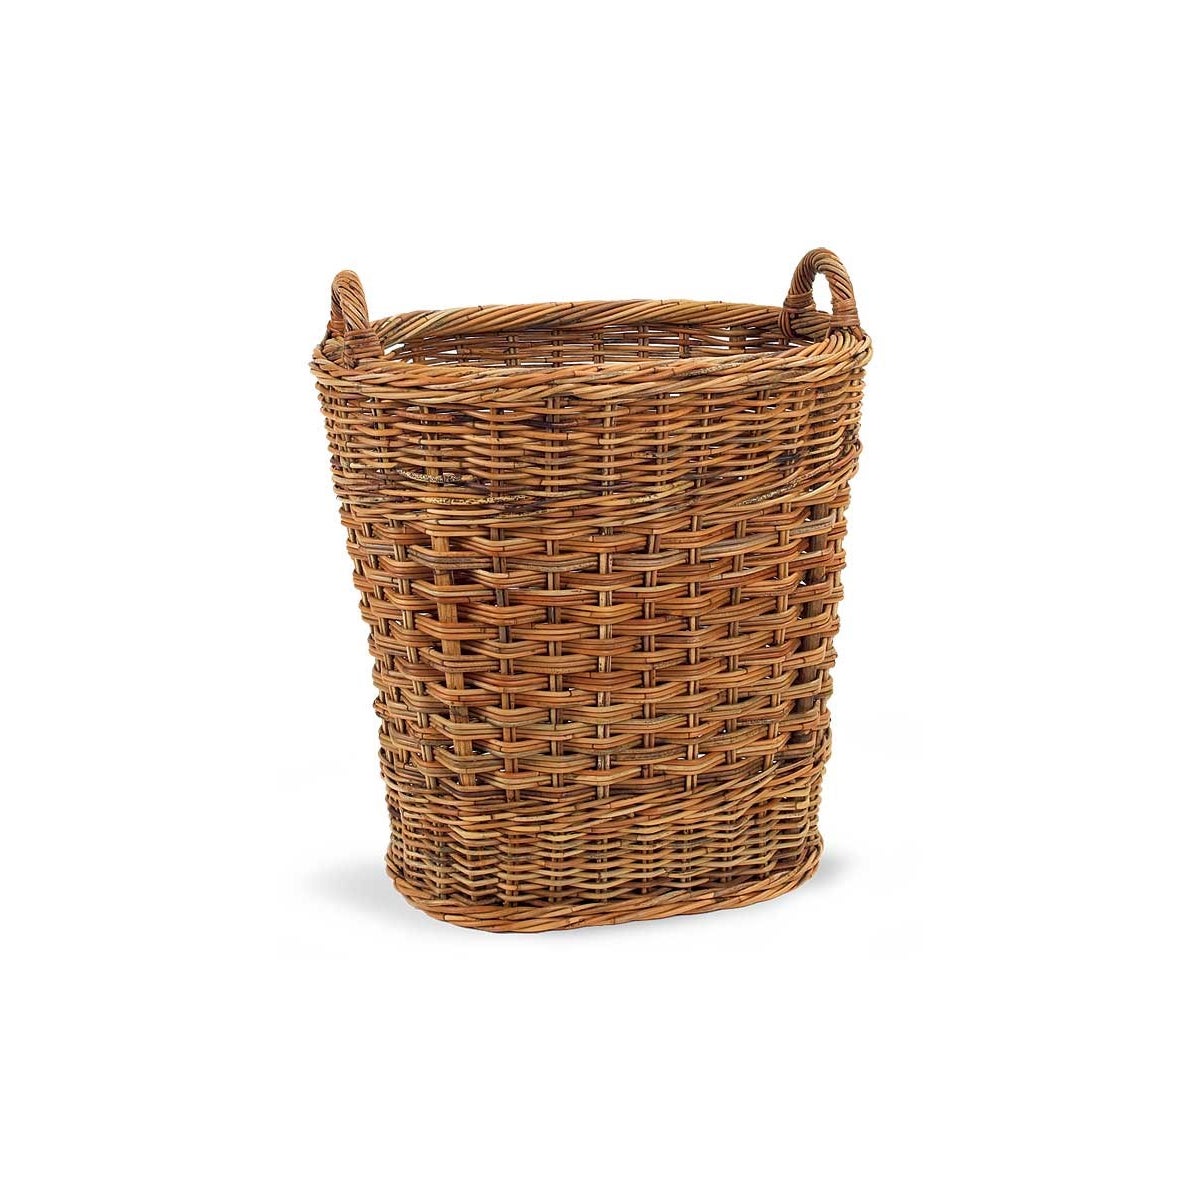 French Country Manor Basket